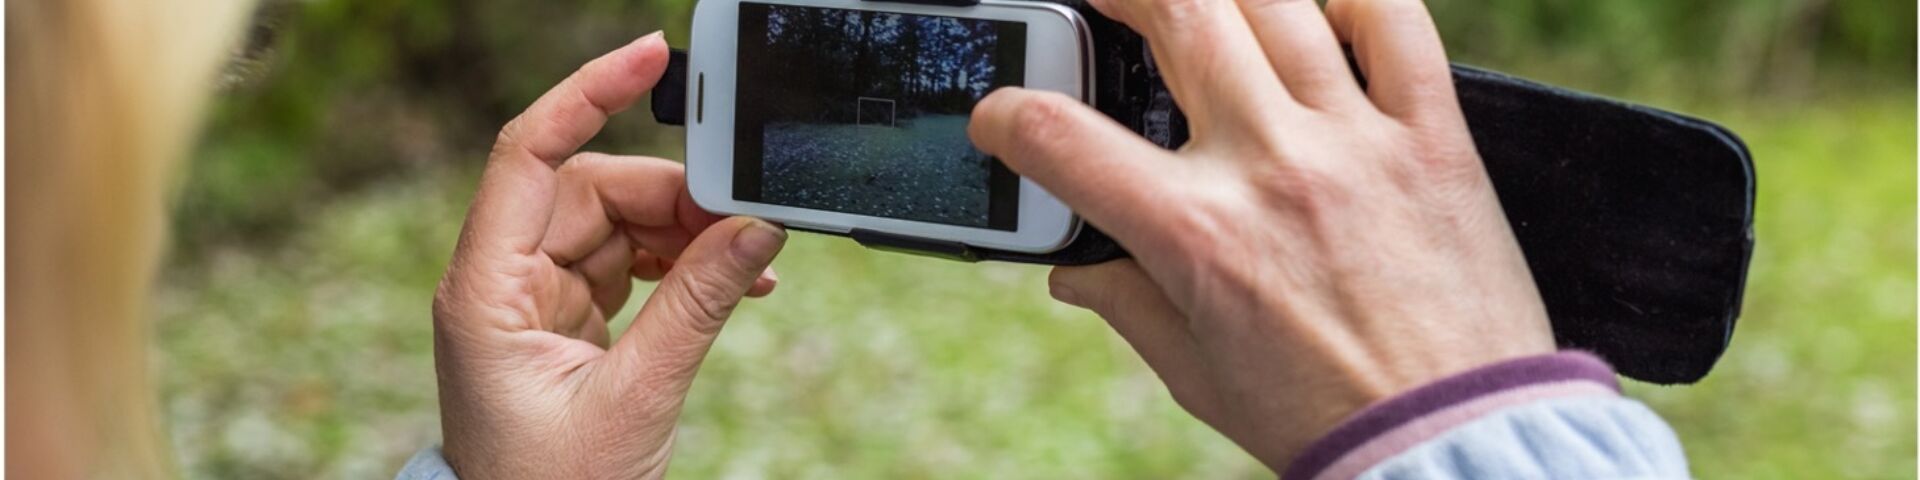 Photo of a person taking a photo of a garden with their phone